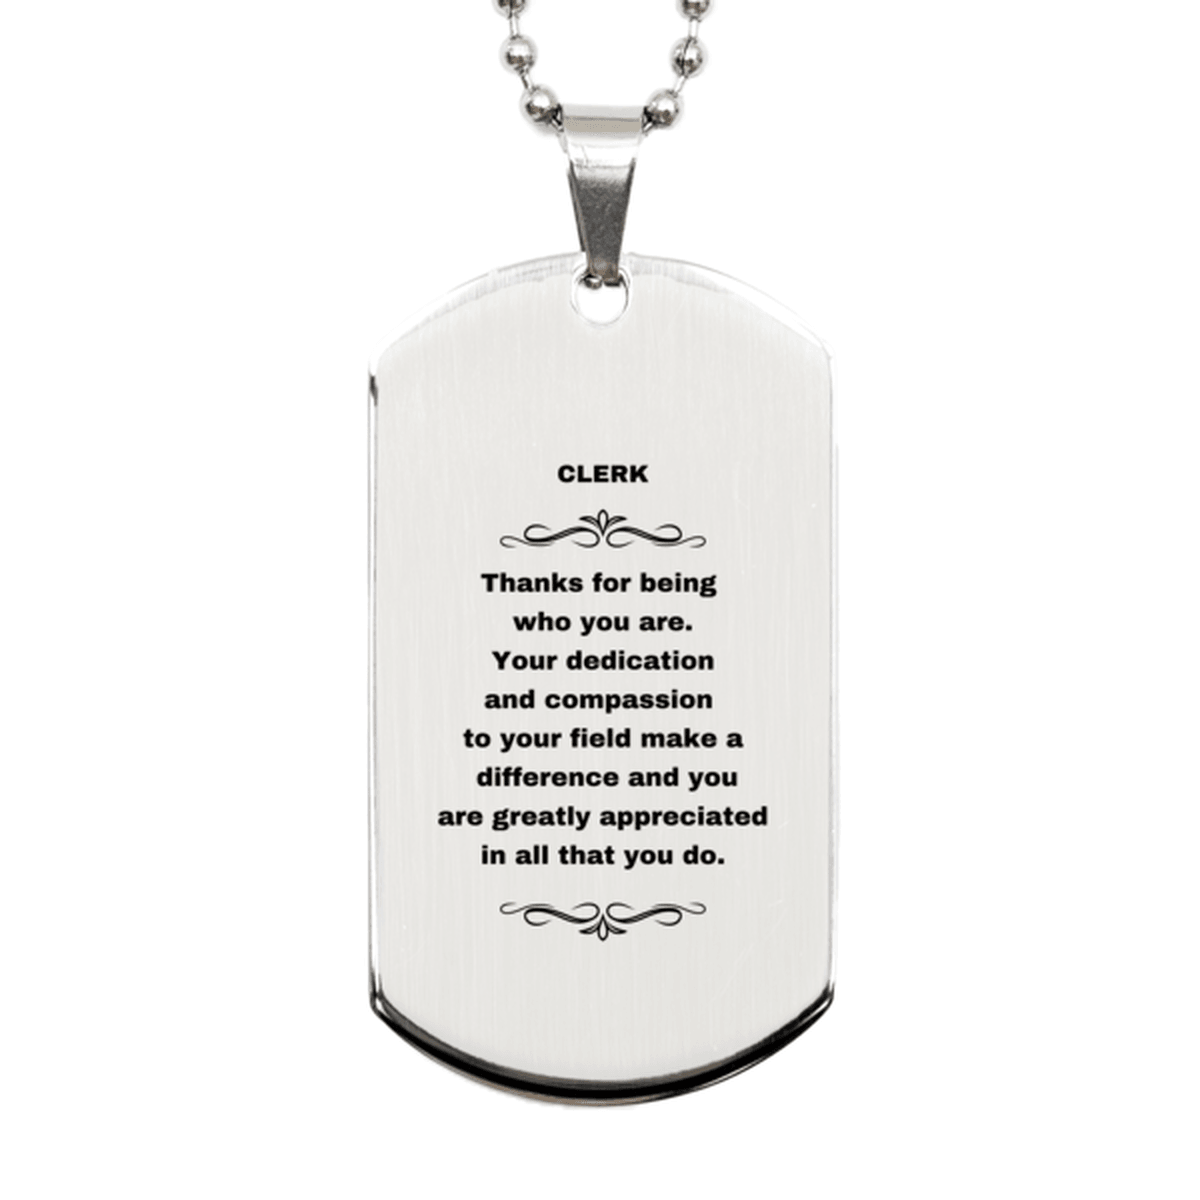 Clerk Silver Dog Tag Engraved Necklace - Thanks for being who you are - Birthday Christmas Jewelry Gifts Coworkers Colleague Boss - Mallard Moon Gift Shop